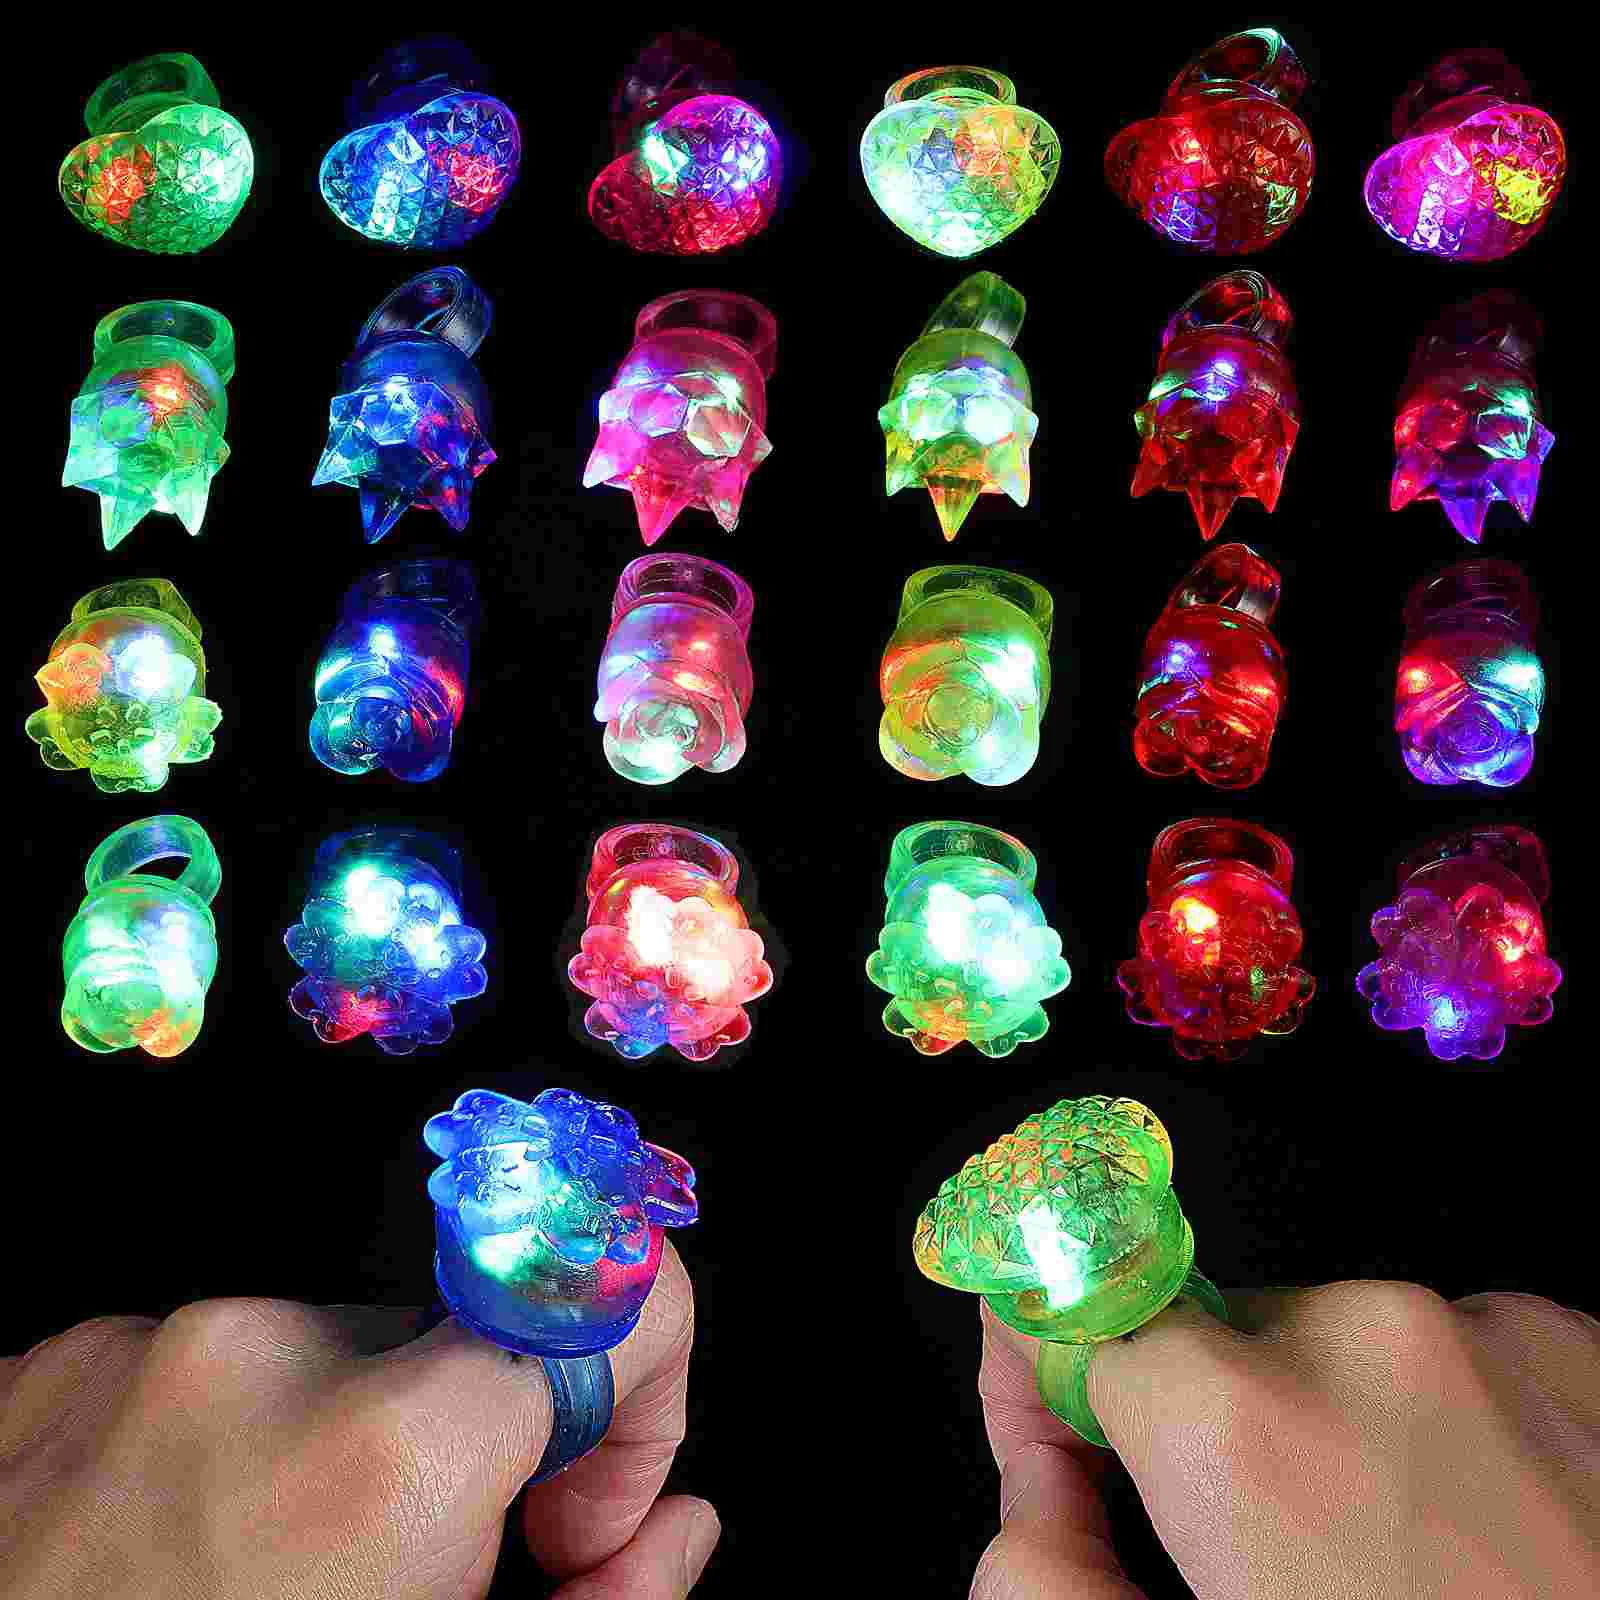 10 pcs strawberry shaped rings silicone flashing led light up jelly bumpy rings finger lights random color 24 Pcs The Gift Ring Light up Rings Party Favor Halloween Jelly for Adult Glowing Child